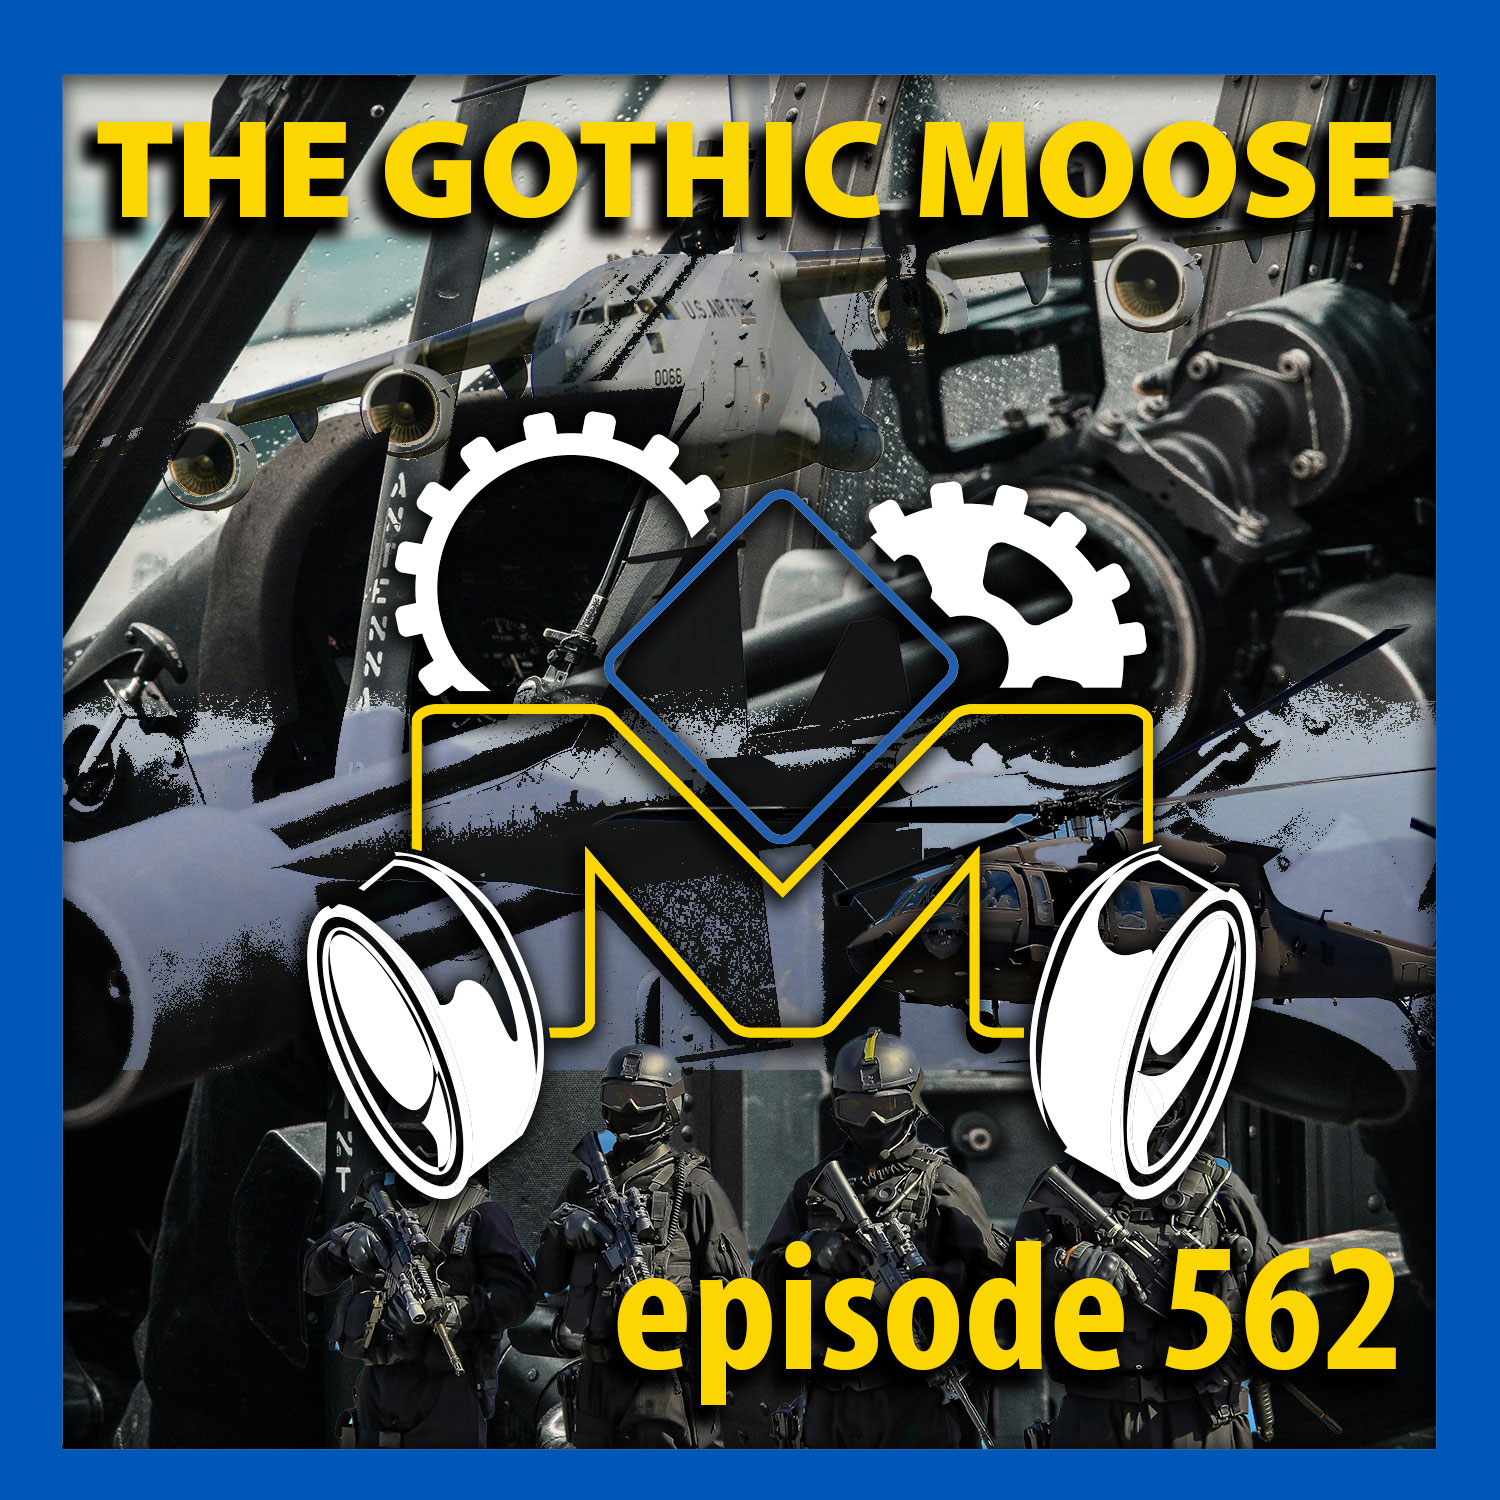 The Gothic Moose – Episode 562 – All Ukrainian bands or bands supporting Ukraine